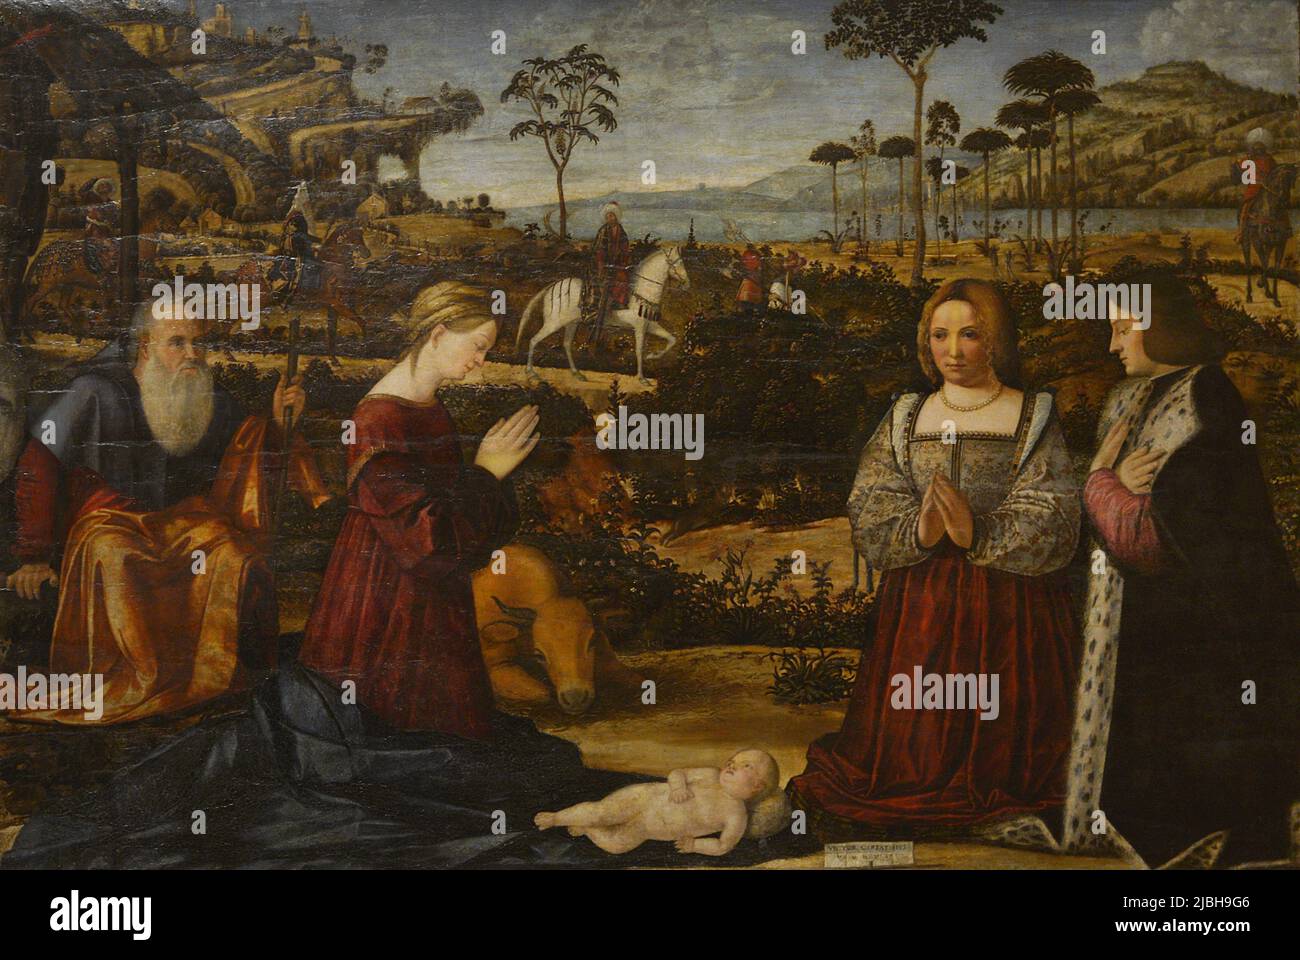 Vittore Carpaccio (ca.1460-1525/1526). Italian painter. Holy Family with Donors, 1505. Tempera and oil (?) on wood. Calouste Gulbenkian Museum. Lisbon, Portugal. Stock Photo